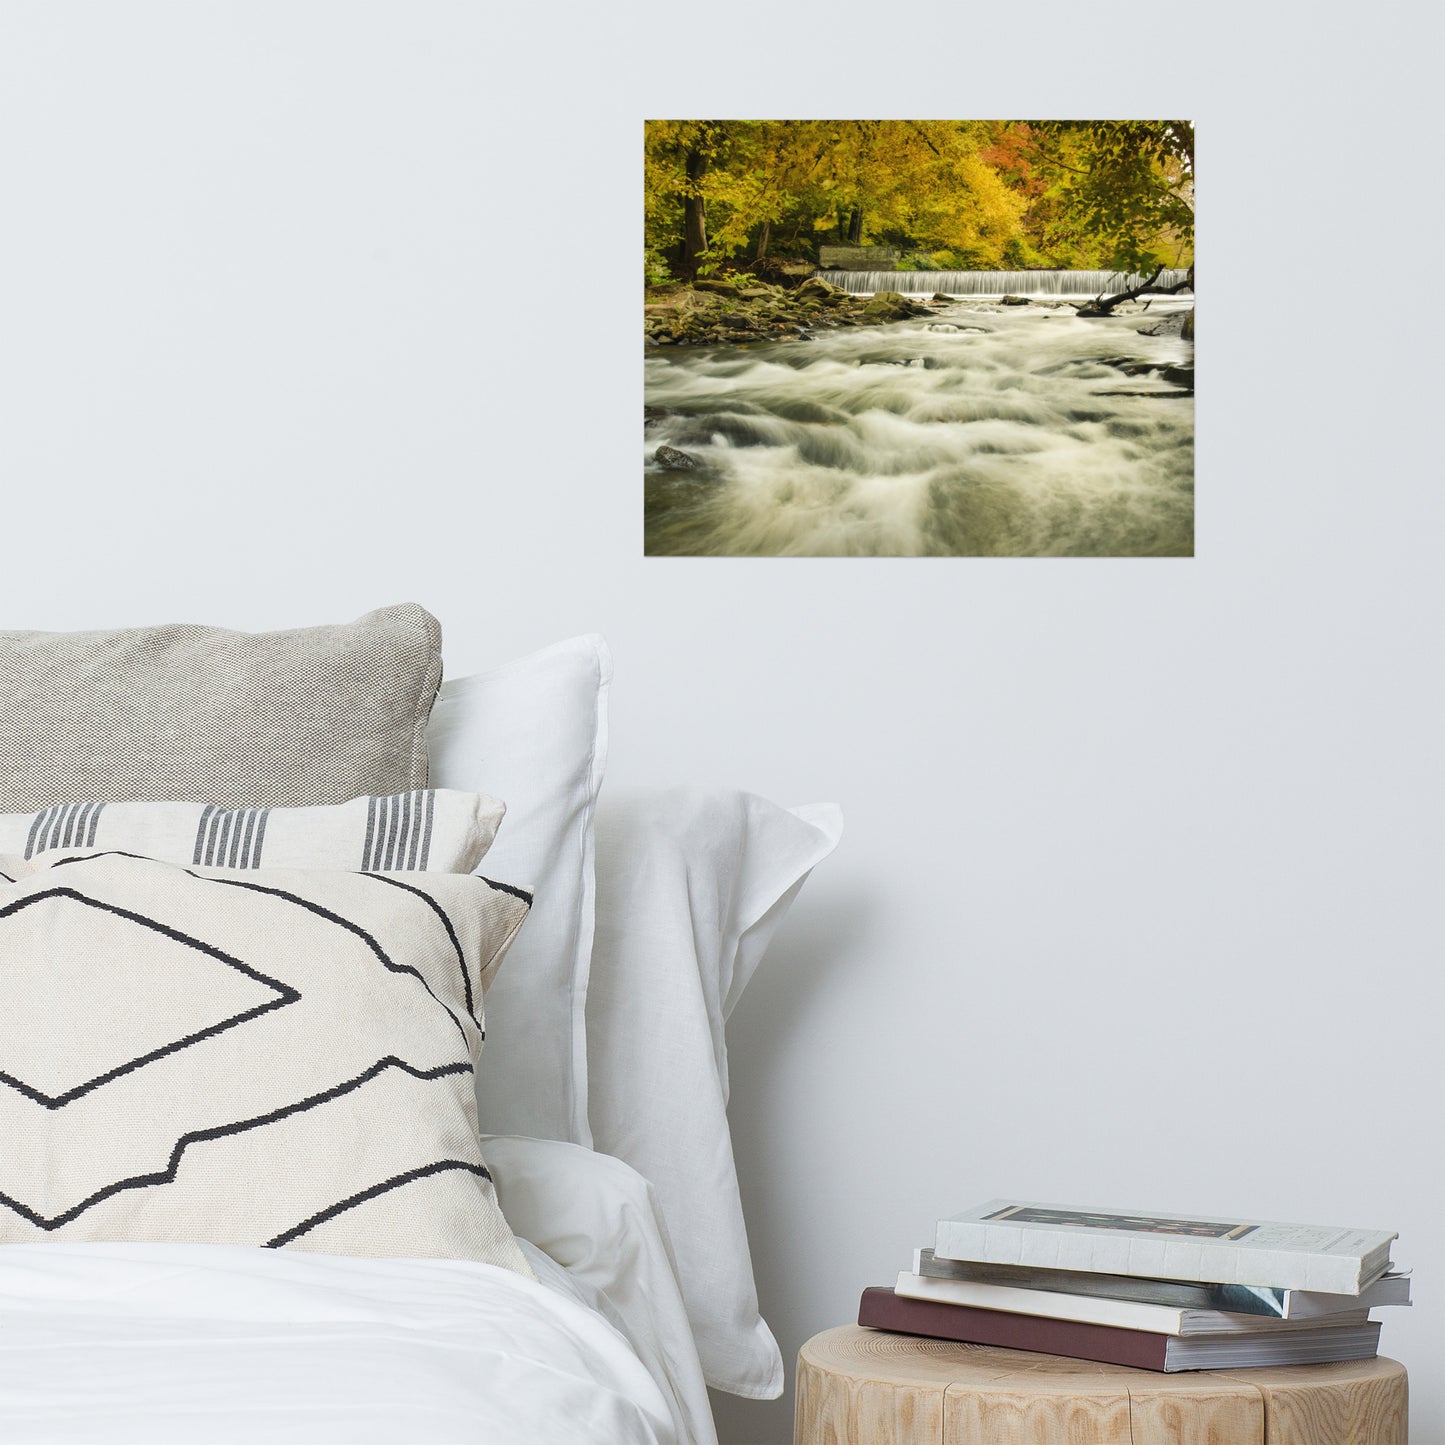 Waterfalls in the Autumn Foliage Landscape Photo Loose Wall Art Prints